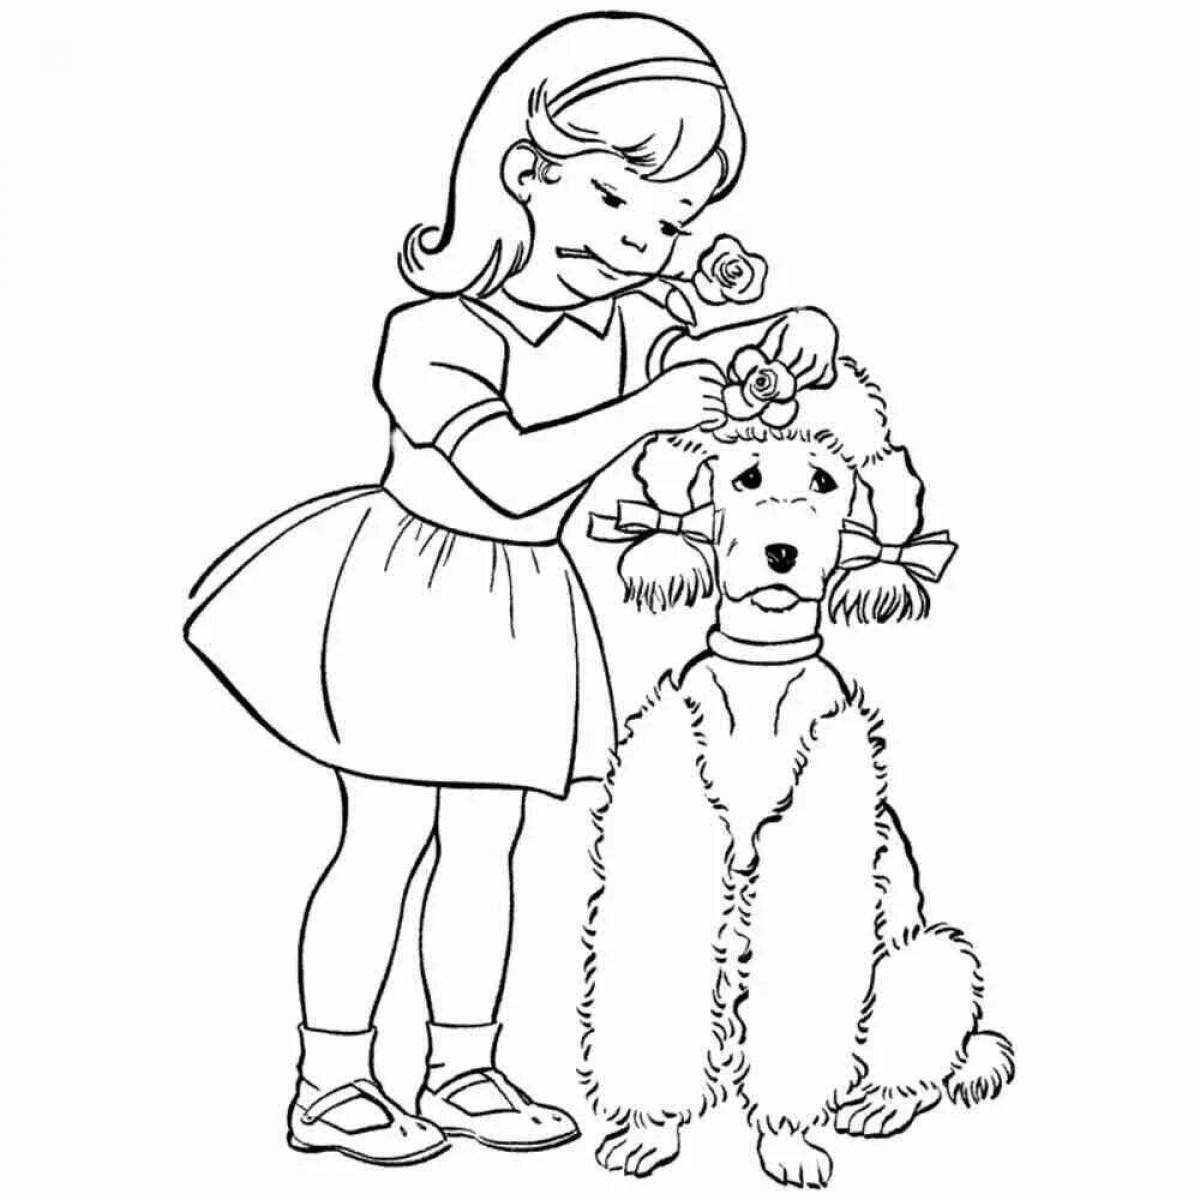 Dazzling coloring girl with a dog